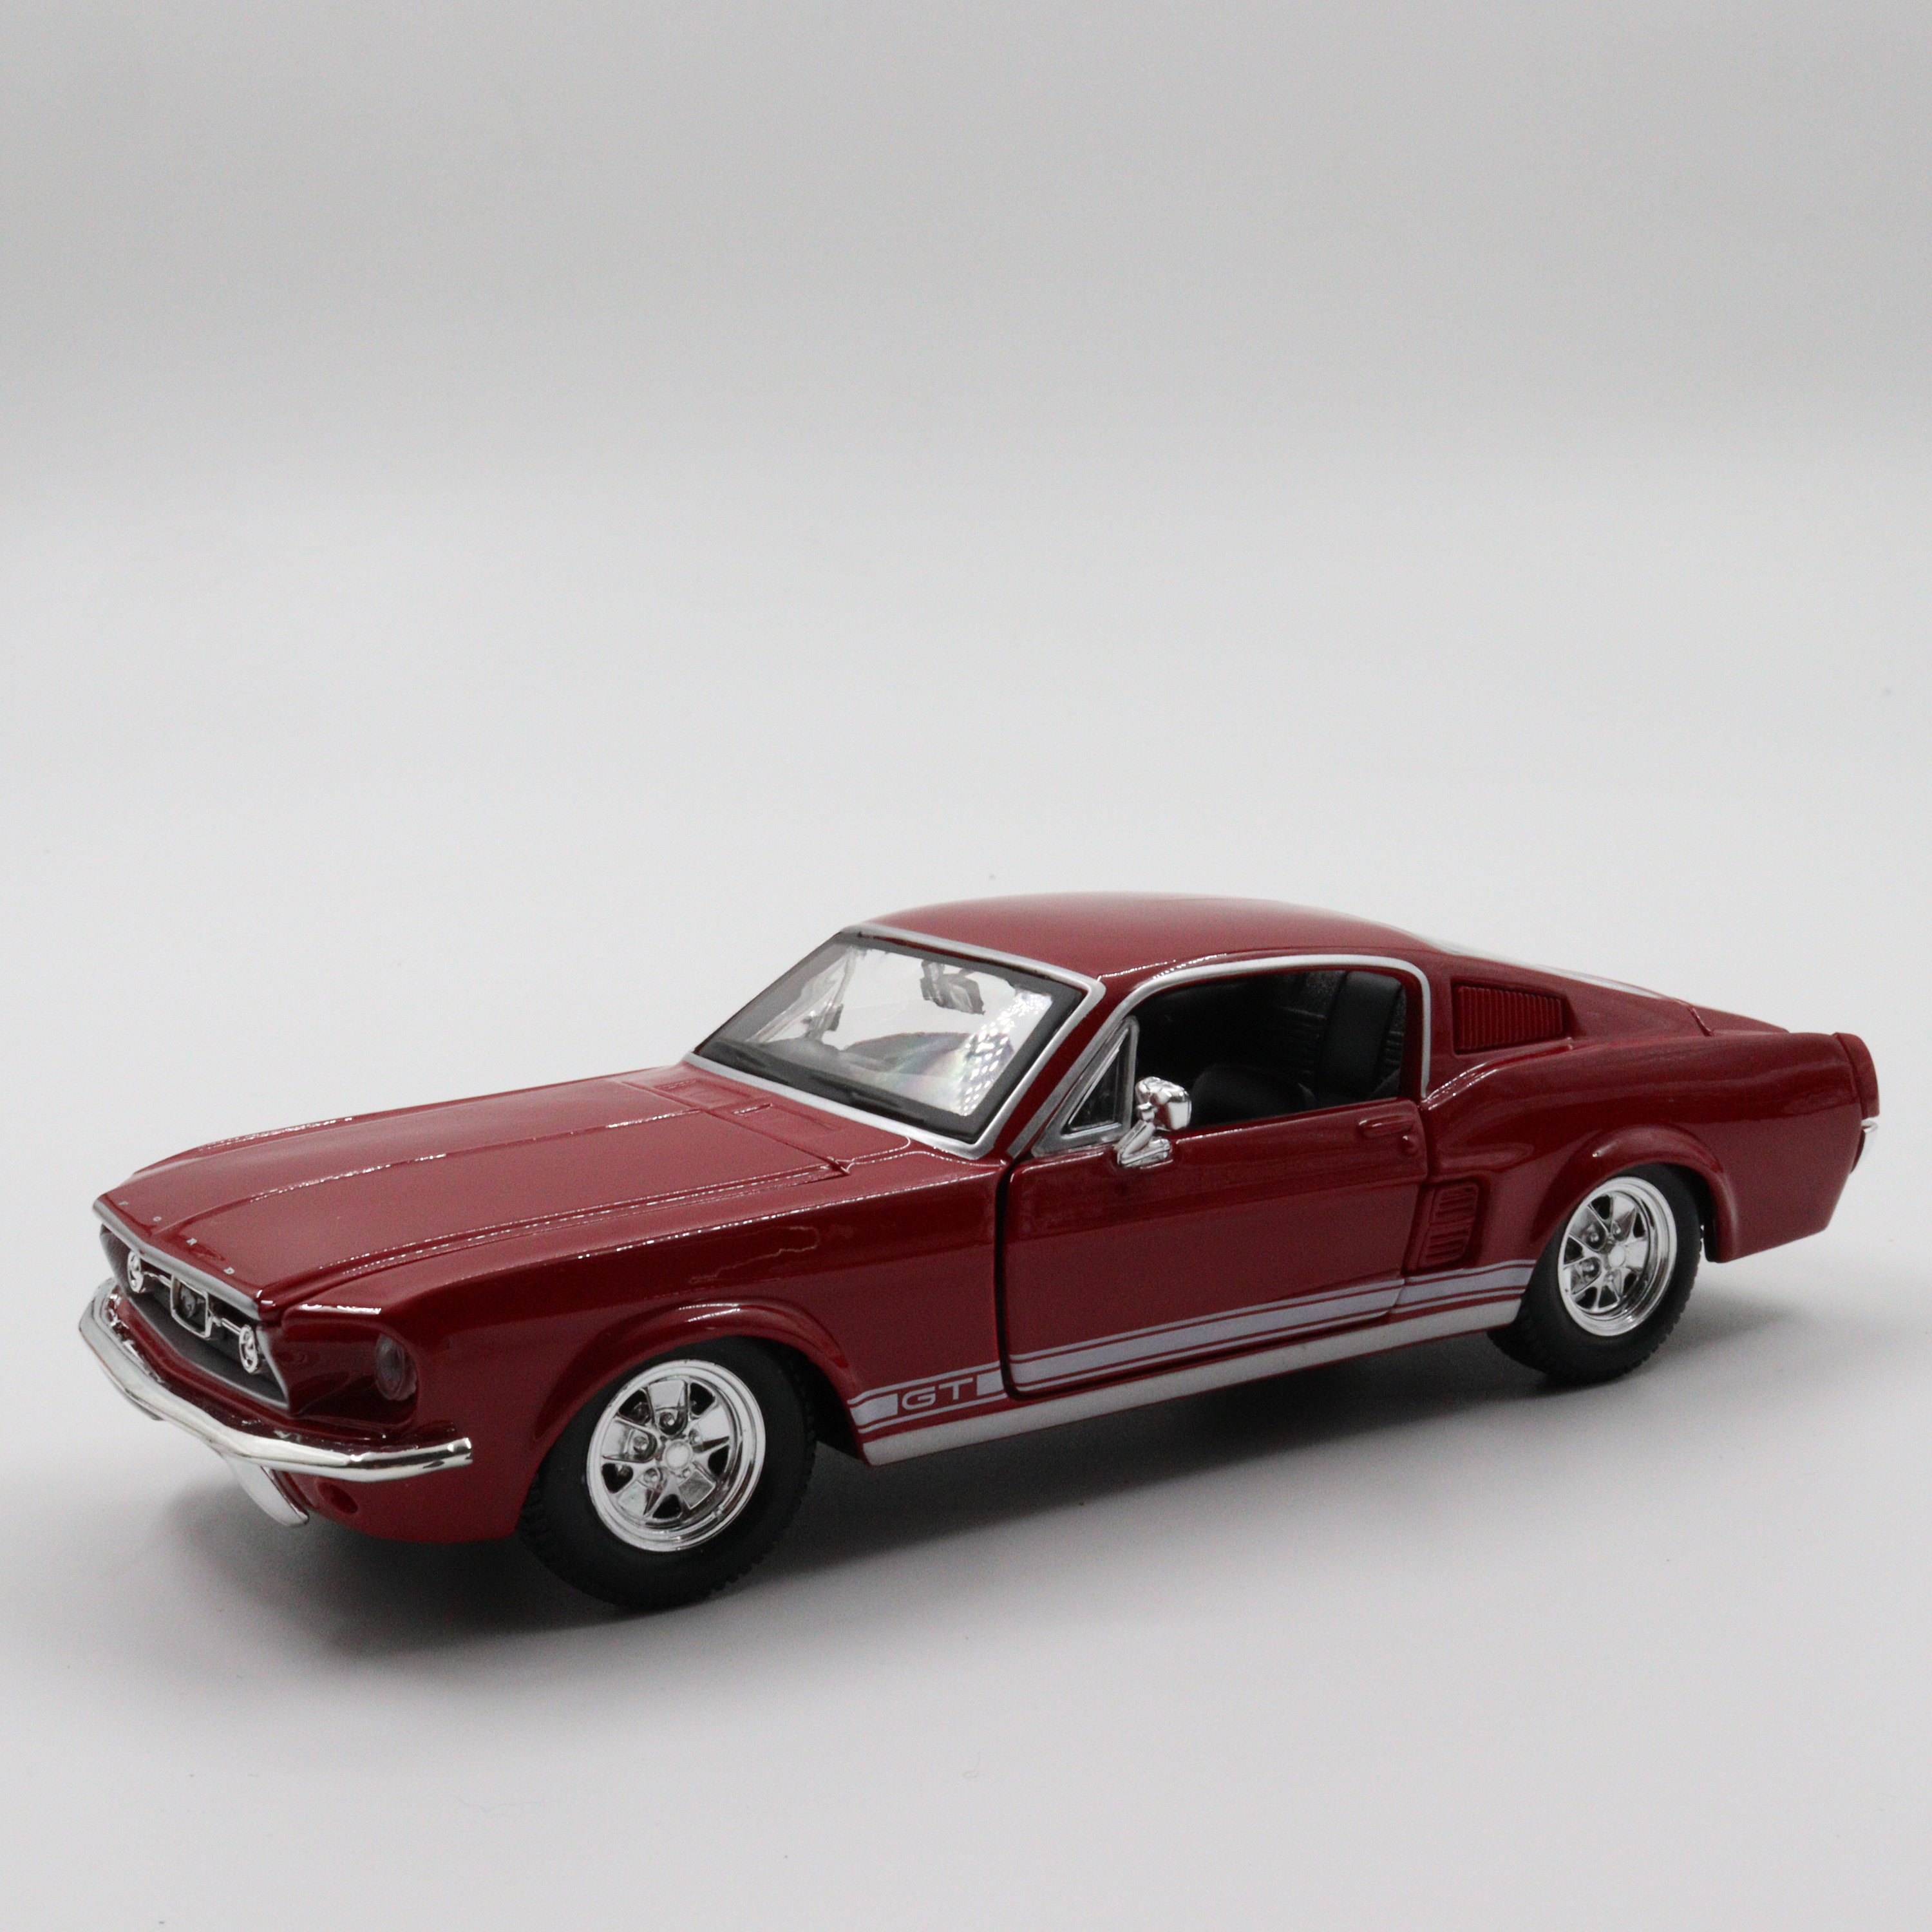 Maisto 1967 Ford Mustang Gtscale 1/24 Red Diecast Carvintage Model